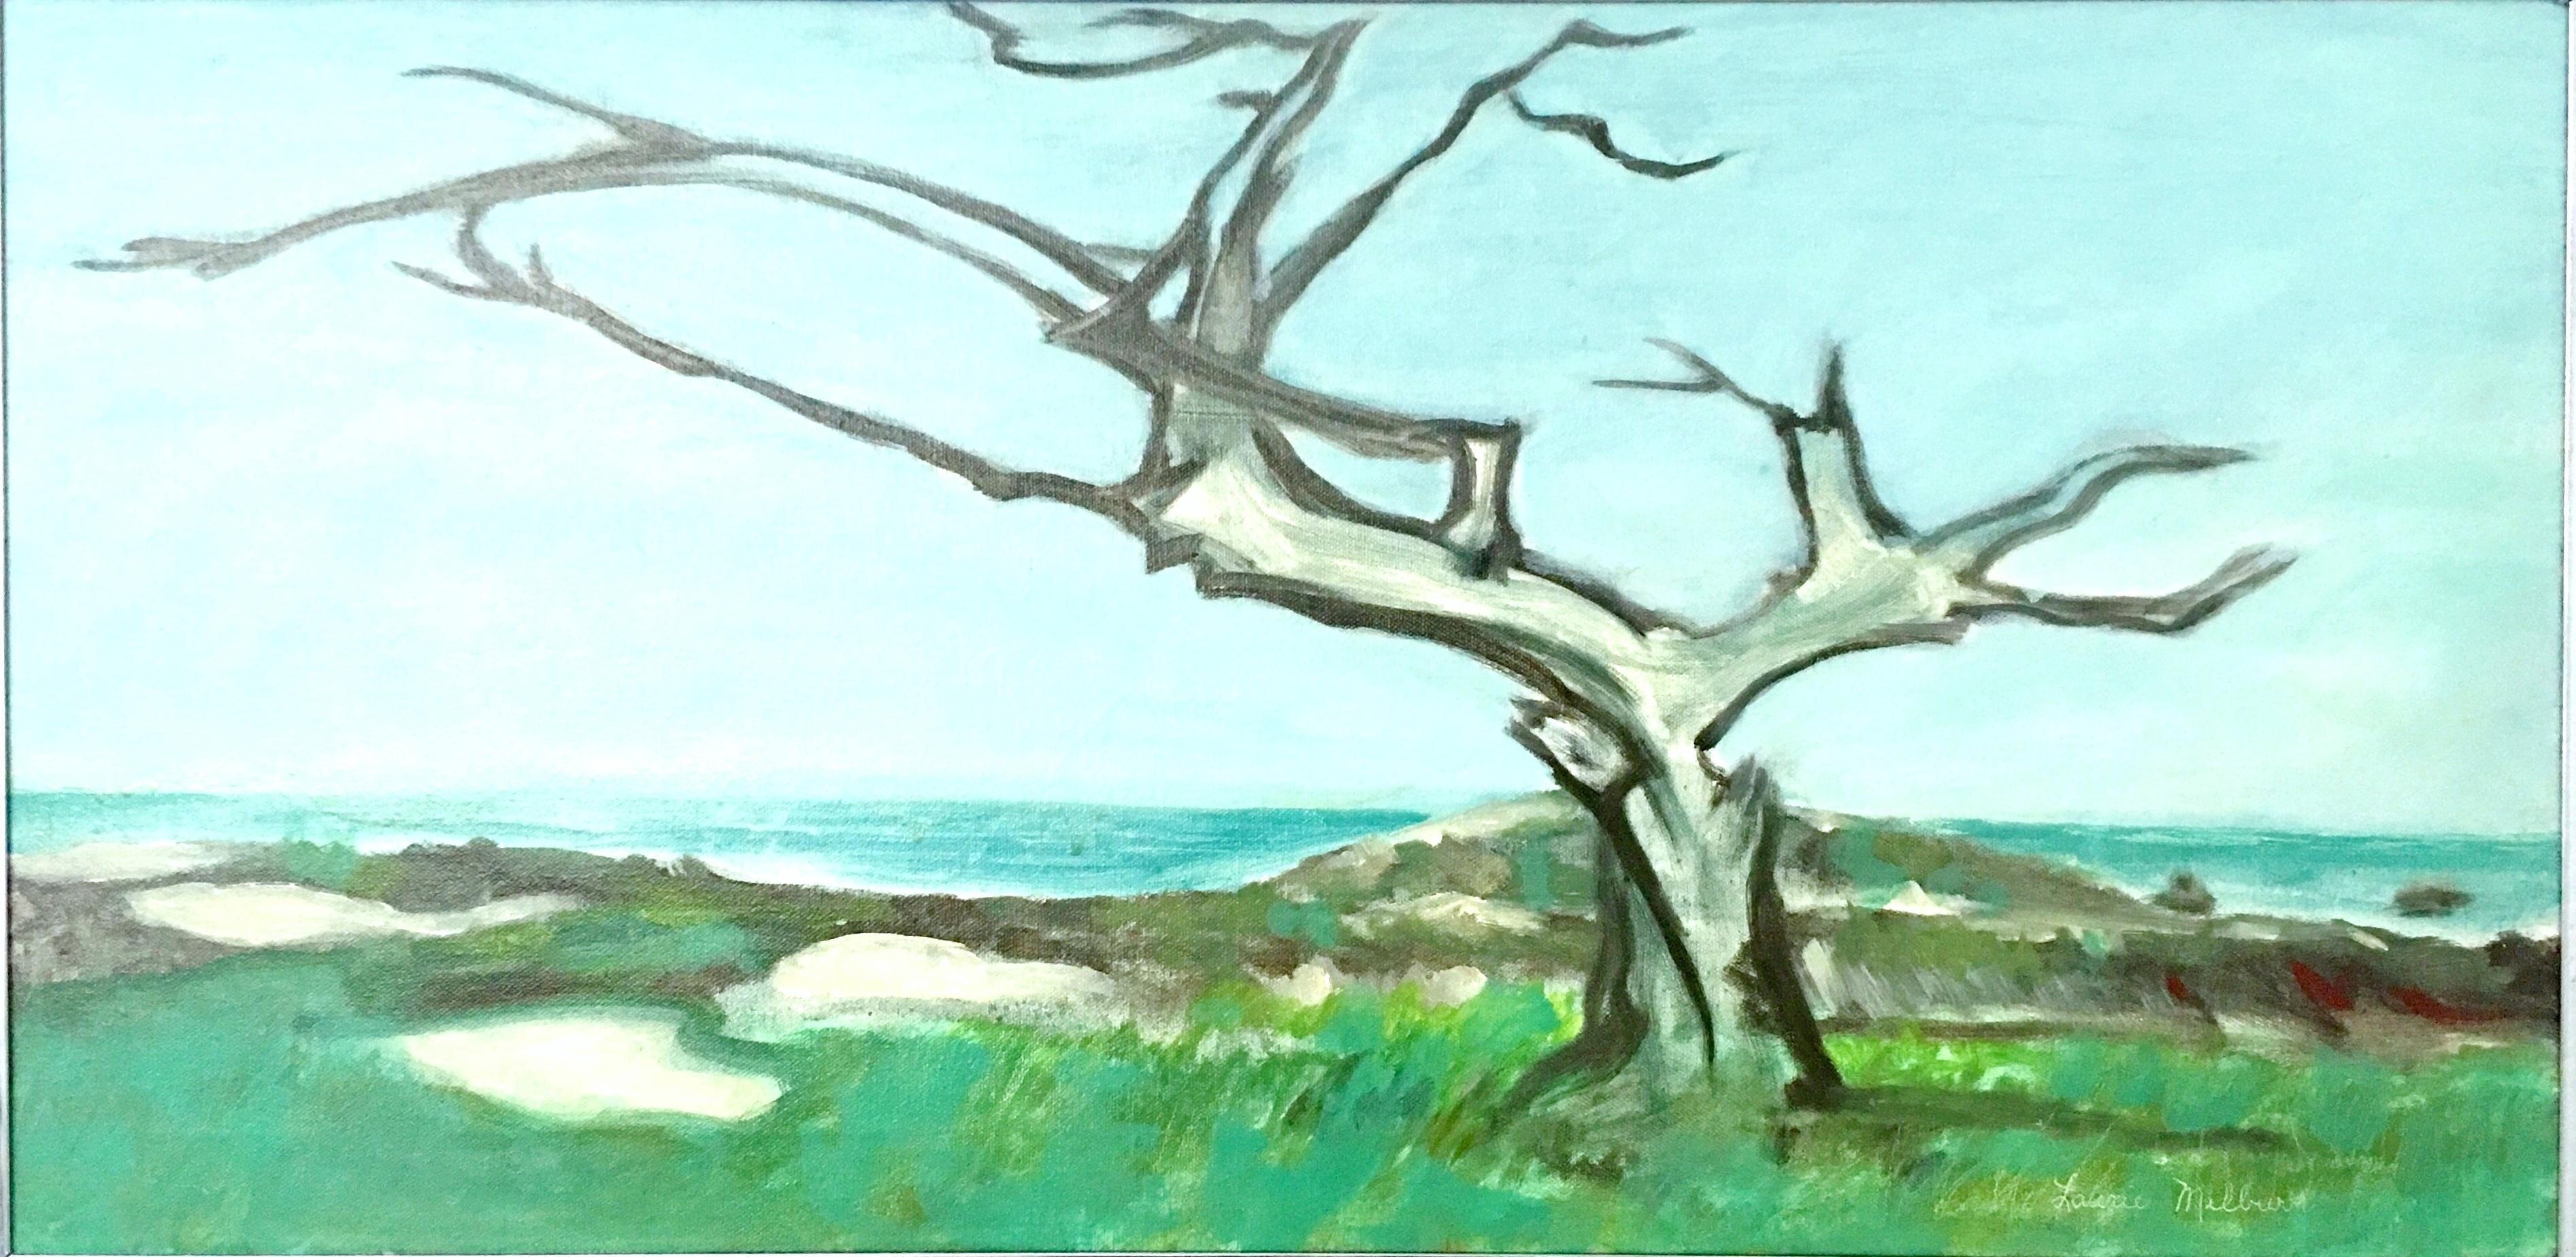 20th century original oil on canvas painting by, Laurie Milburn. This original Artist-signed piece feature oil on canvas tree and ocean motif with great attention to detail. Signed front lower right,
Laurie Milburn. Framed is a simple silver